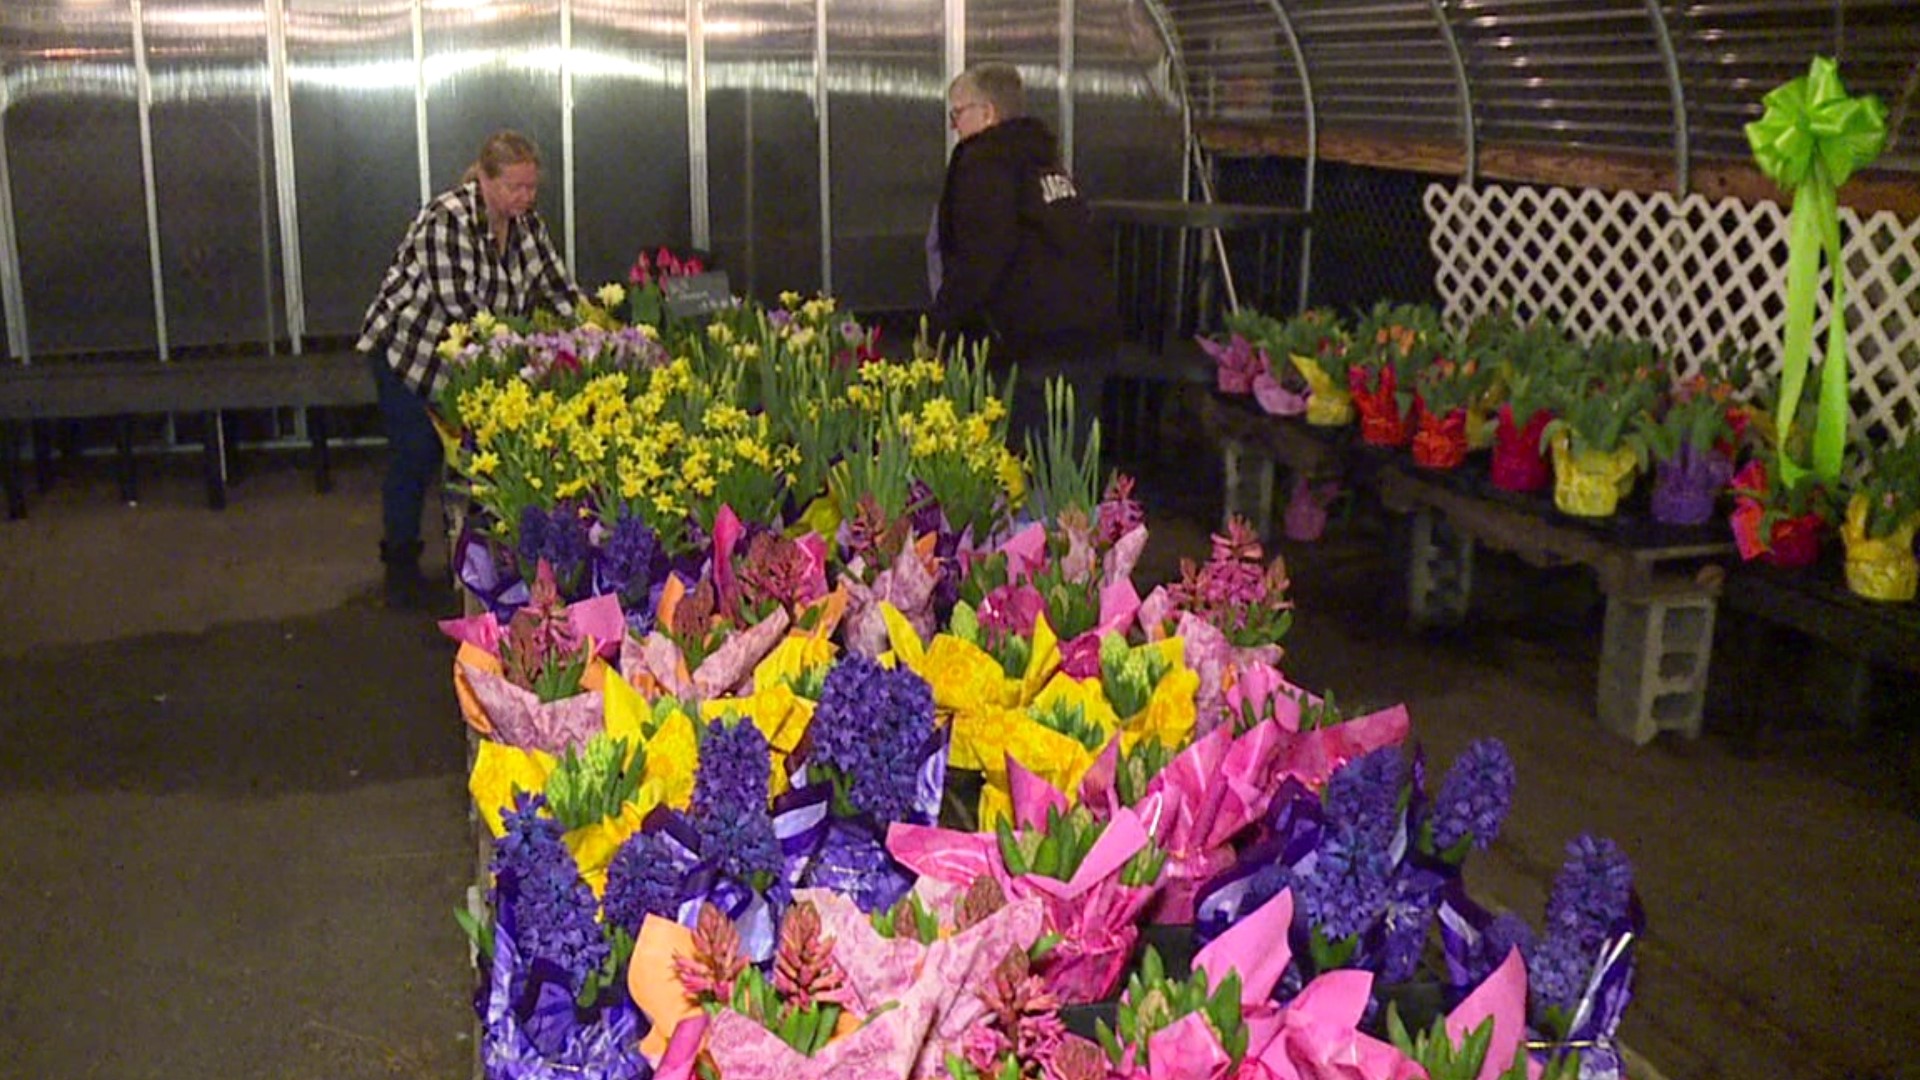 It's a pretty sight at gardening centers across our area — spring flowers in full bloom.